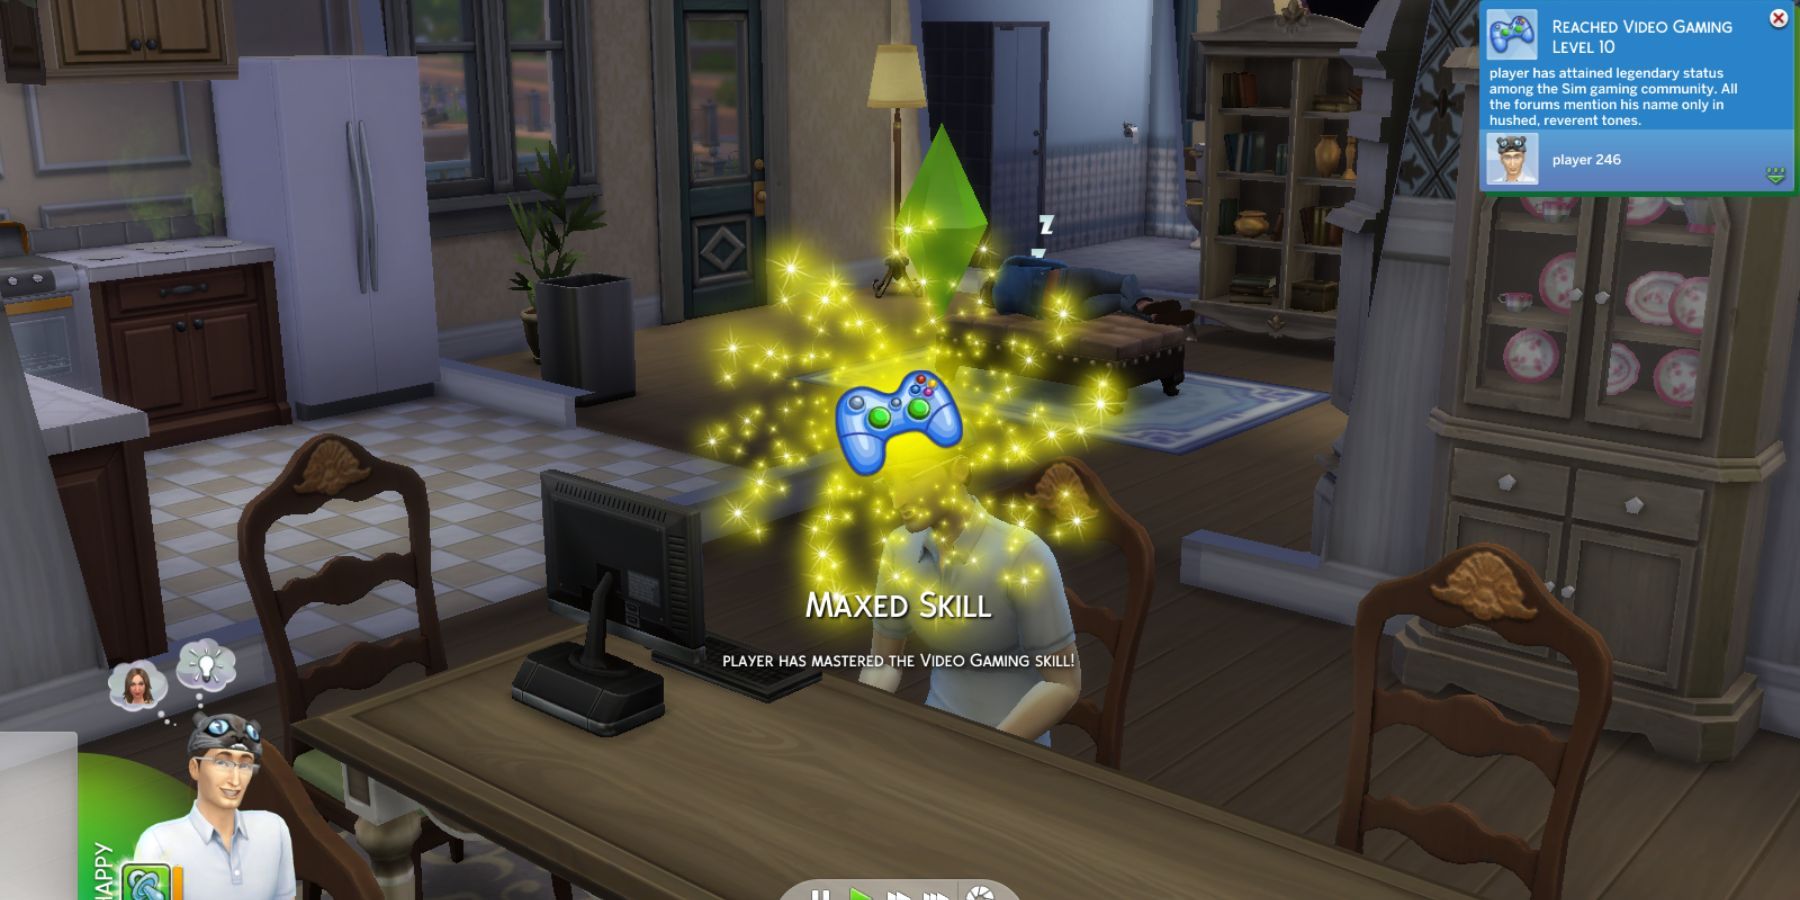 max video game skill sims 4